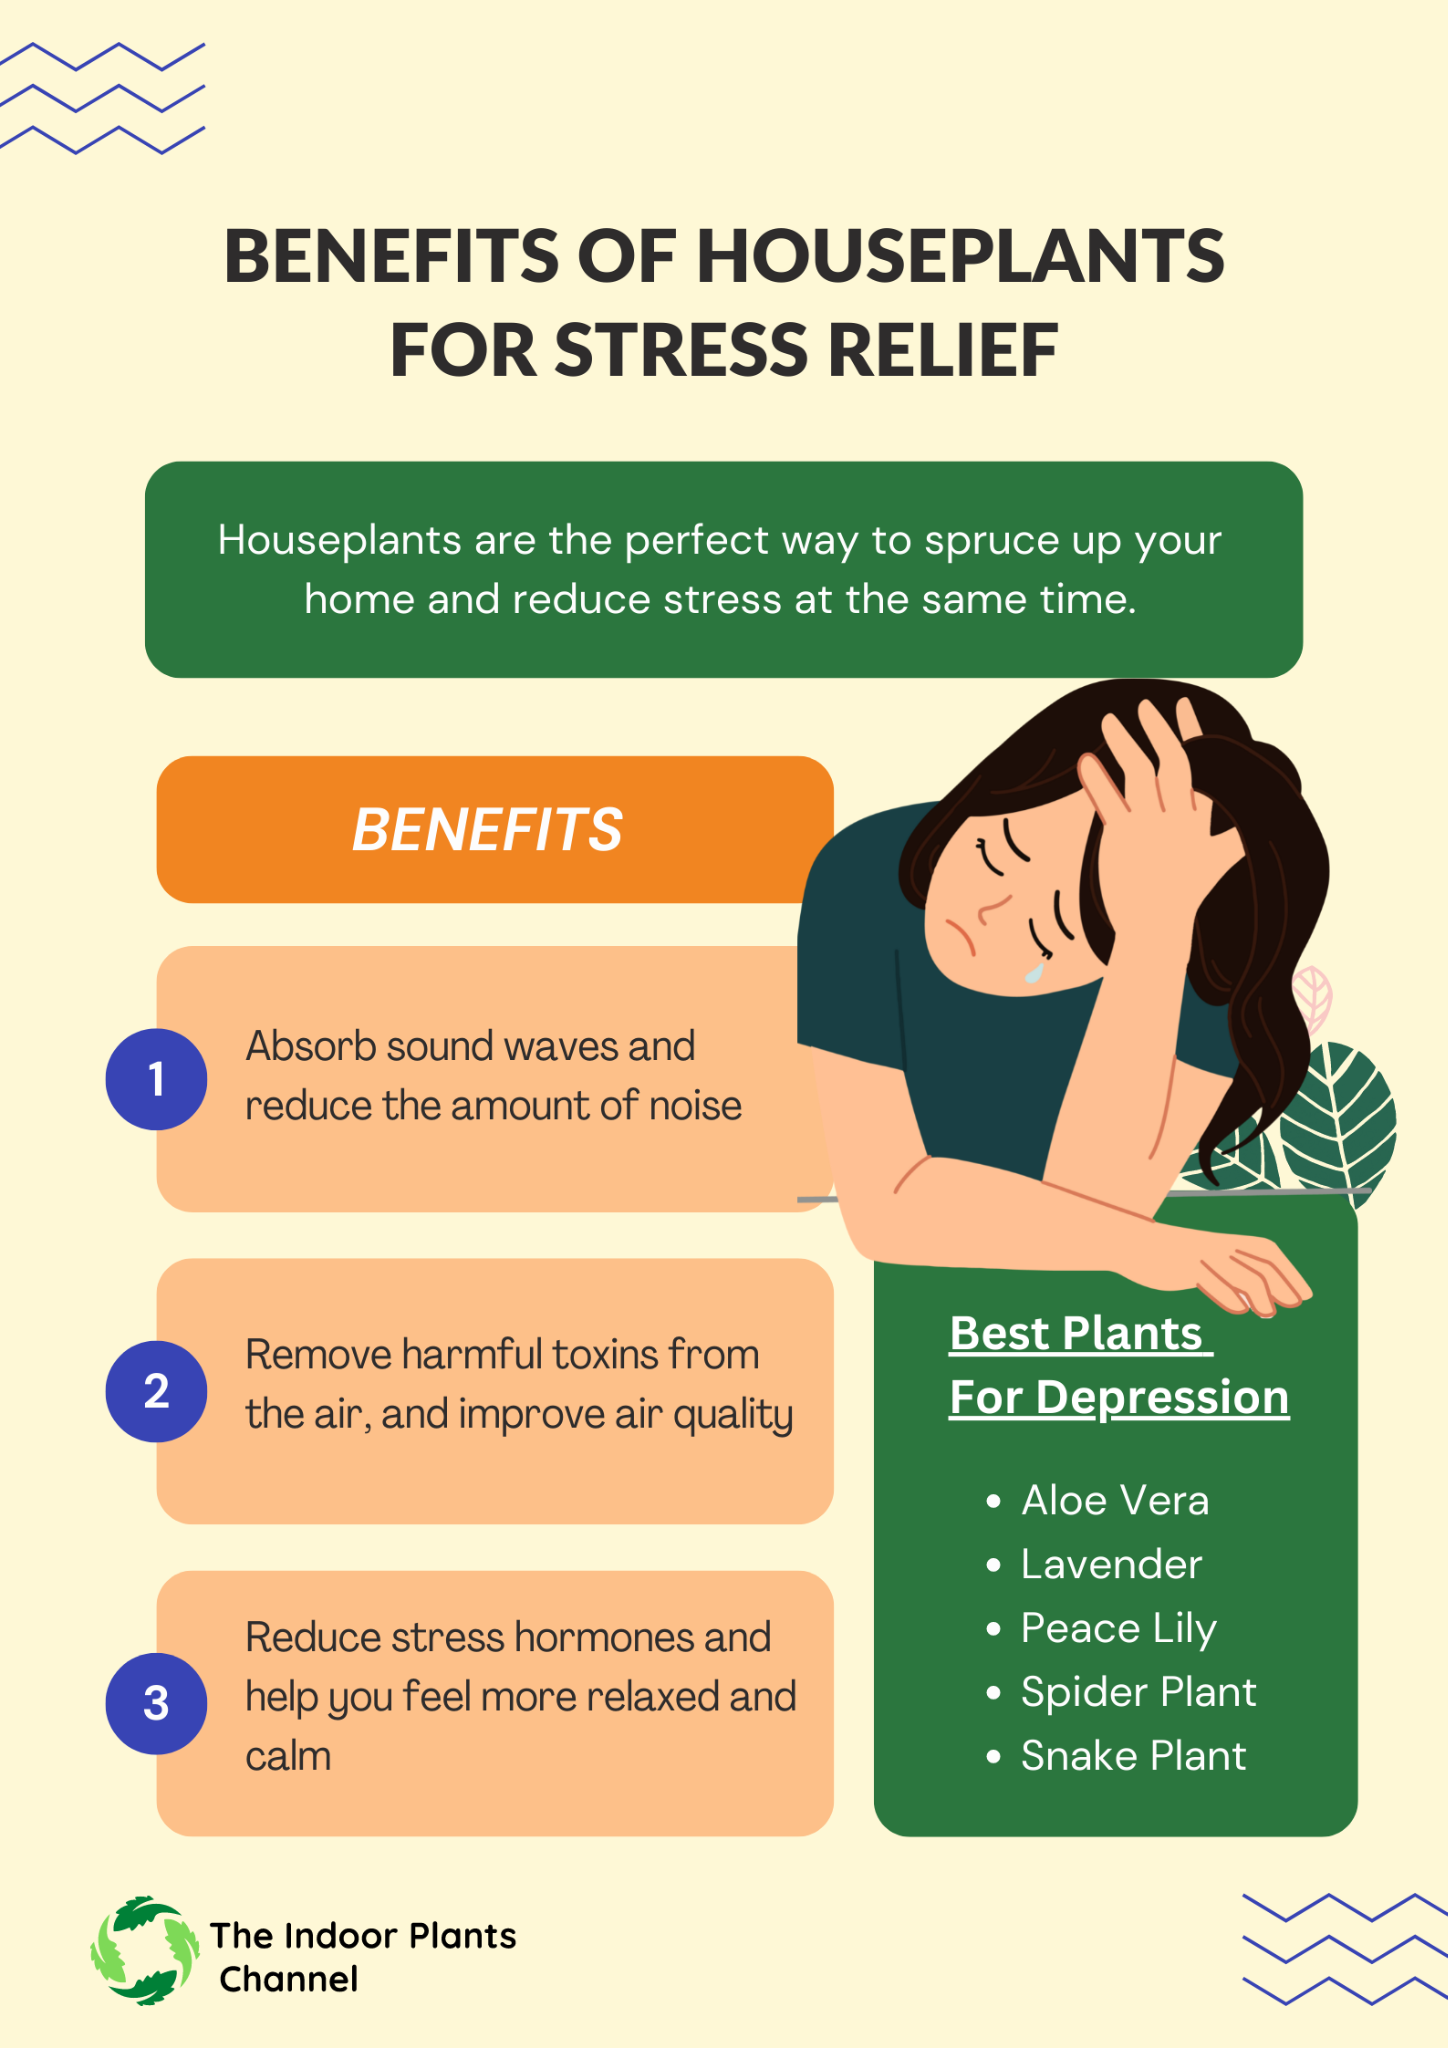 Benefits of houseplants for stress relief